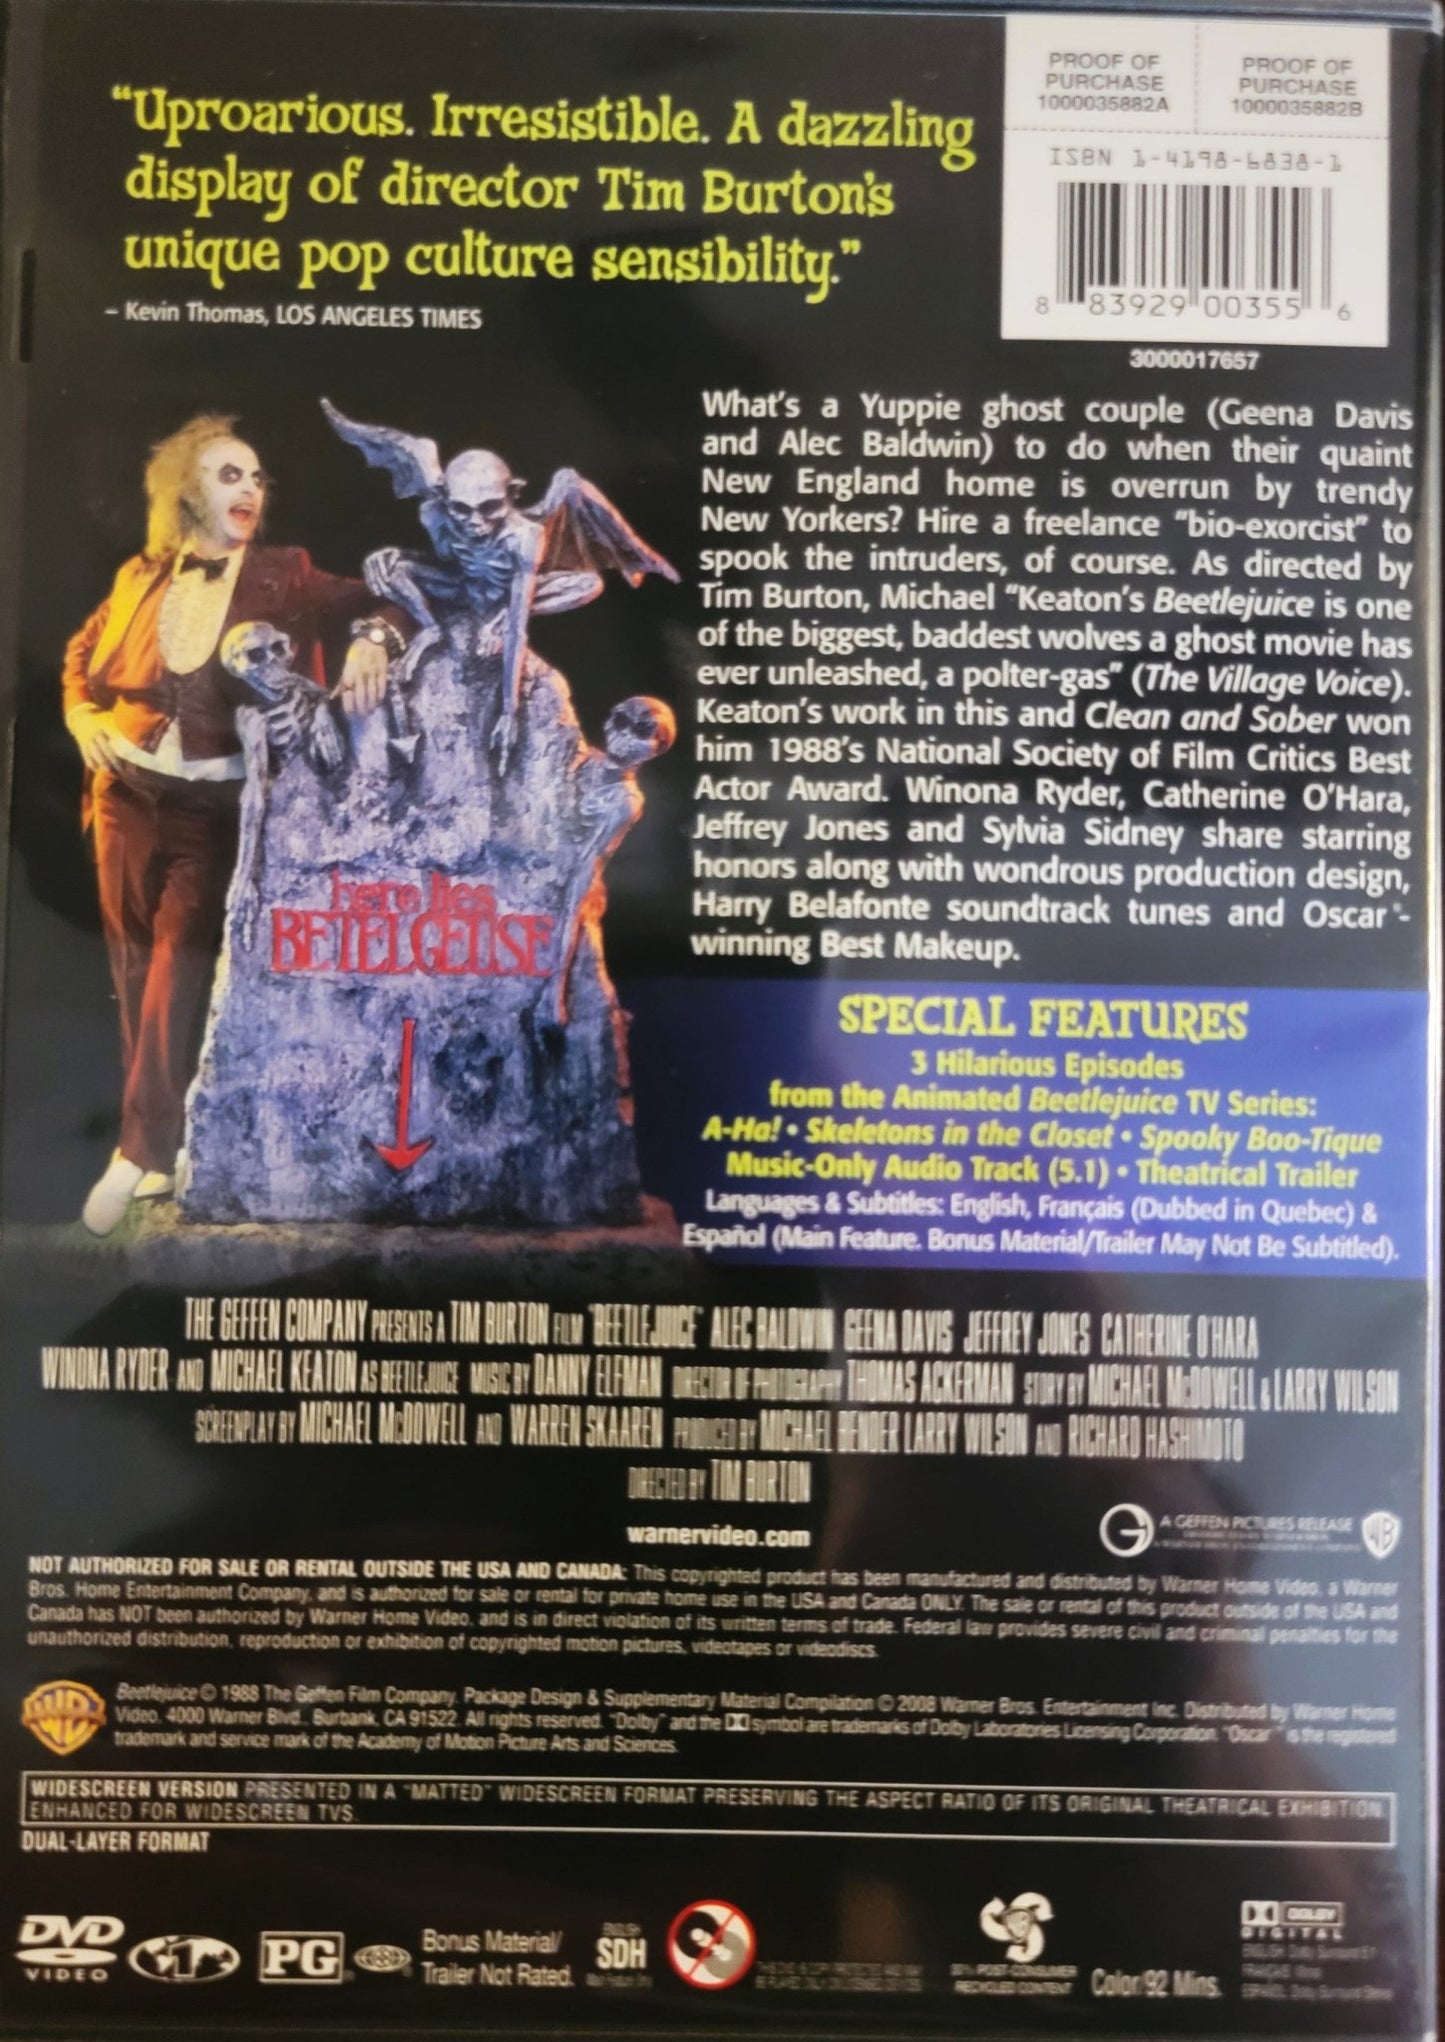 Warner Brothers - Beetlejuice | DVD | 20th Anniversary Deluxe Edition Widescreen - DVD - Steady Bunny Shop